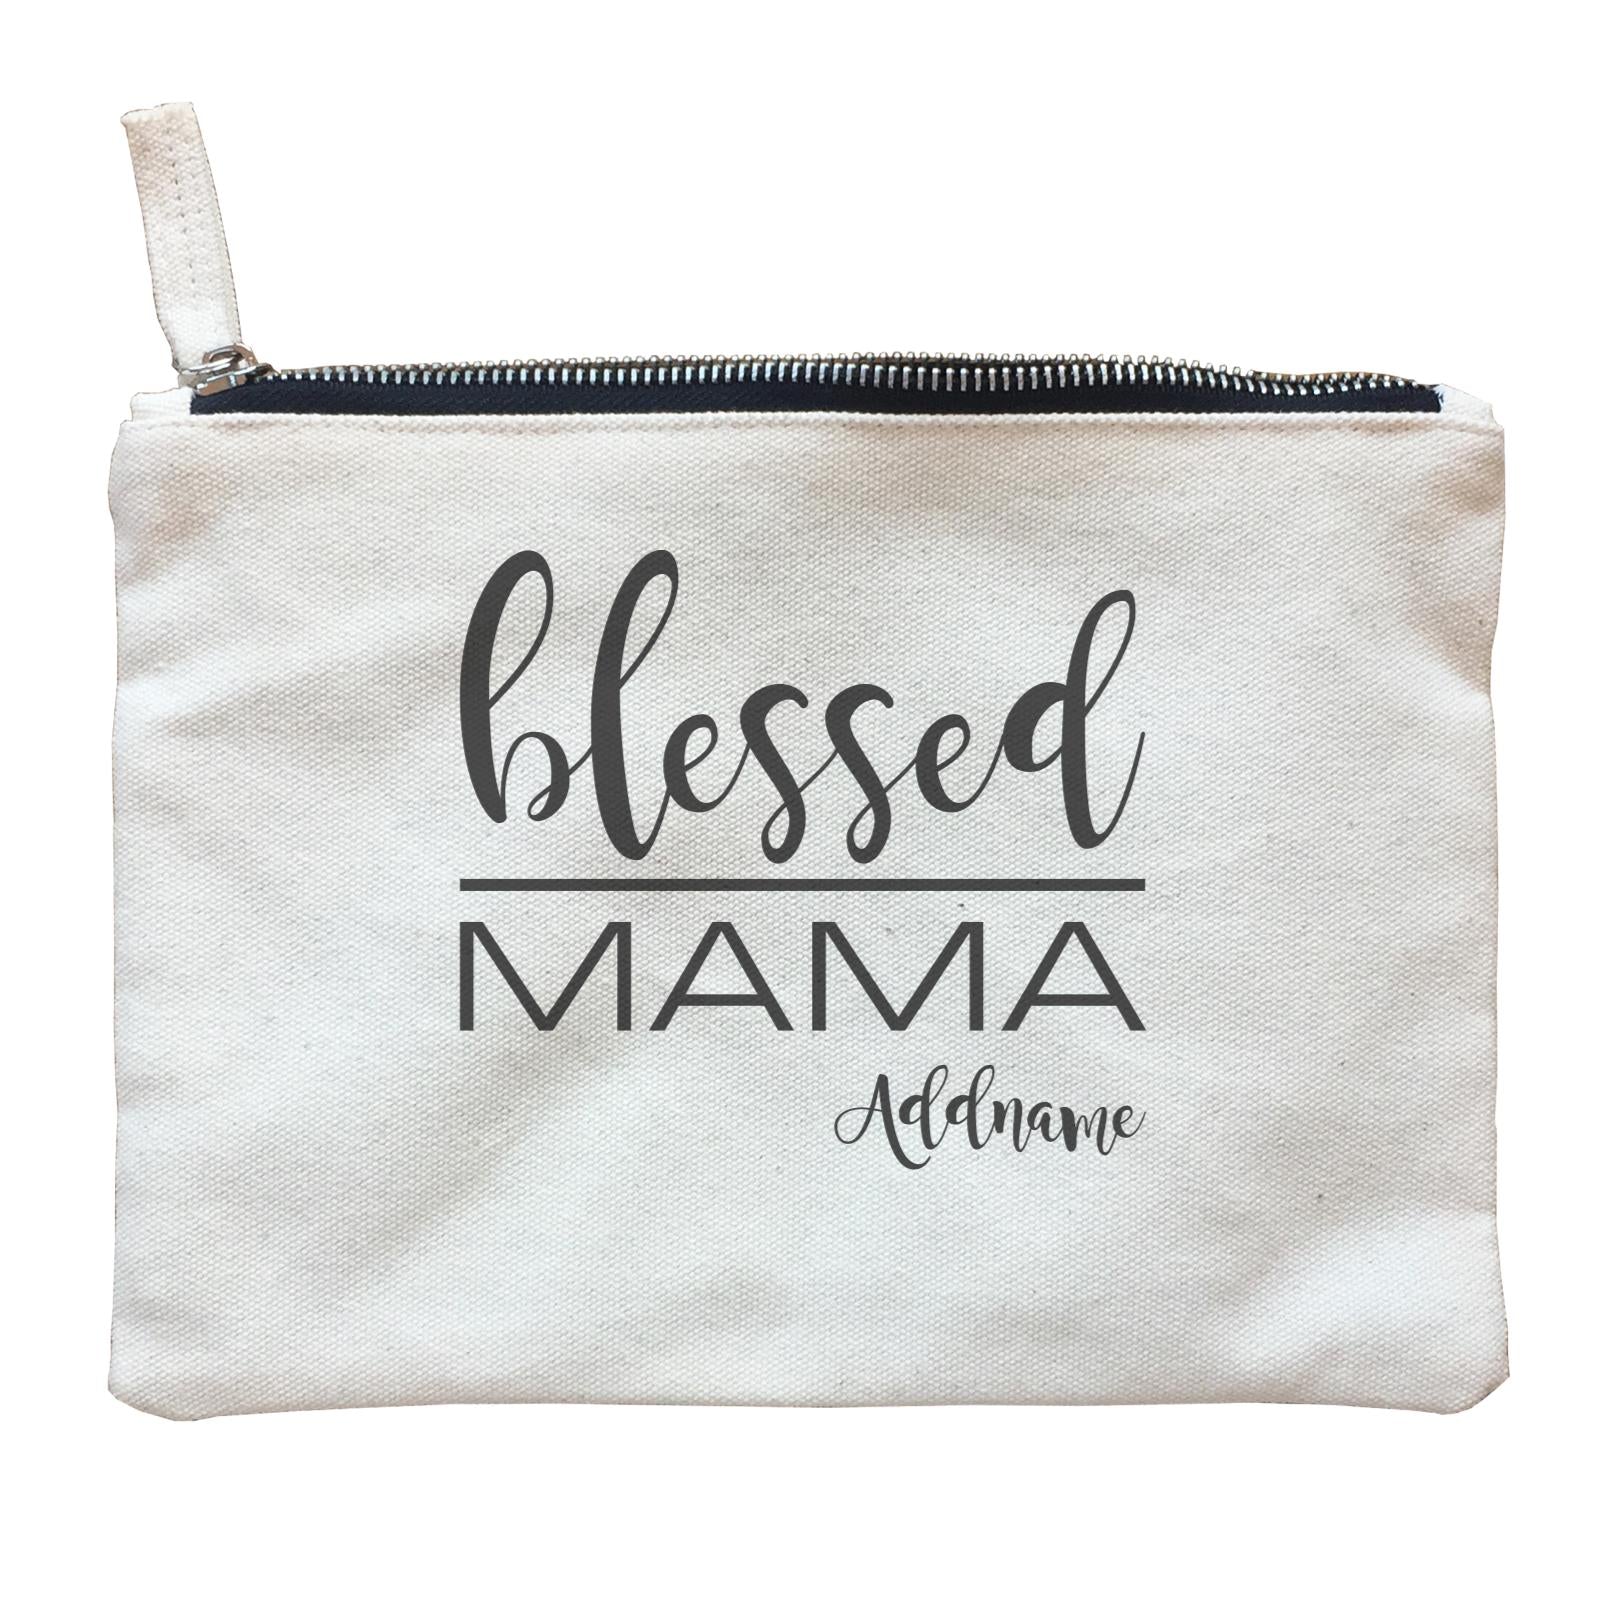 Blessed Mama Zipper Pouch